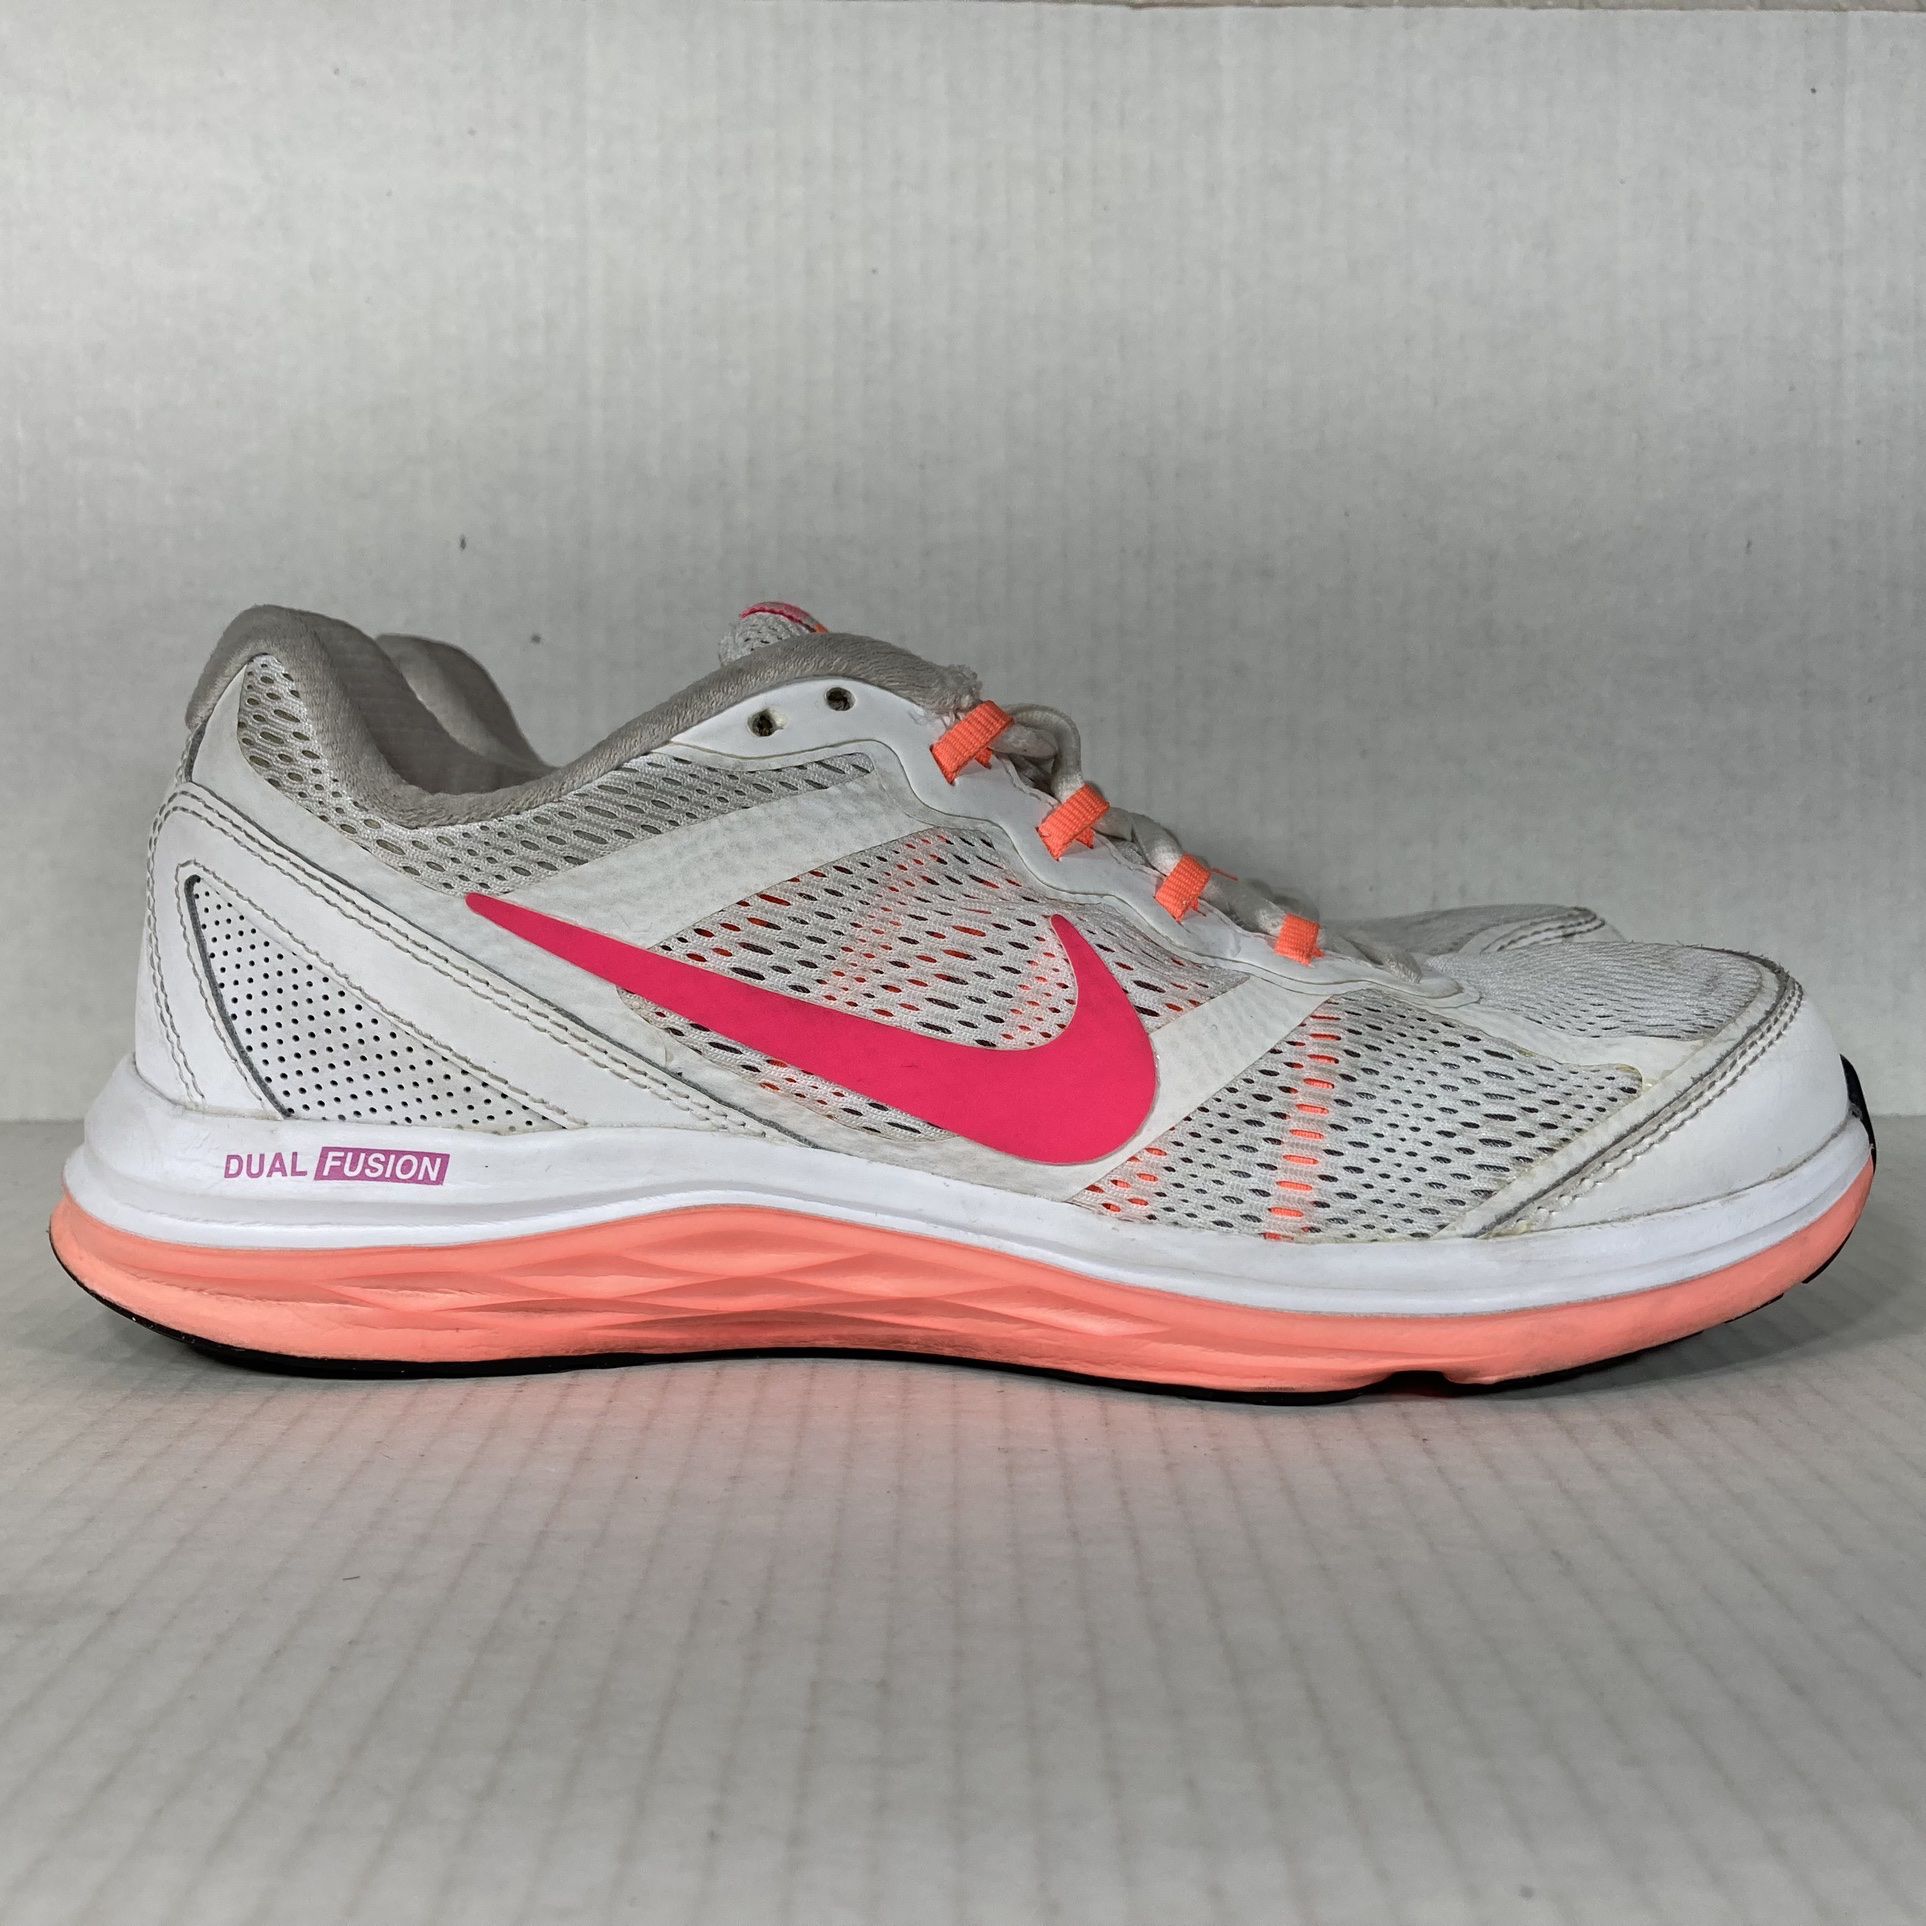 Nike Dual Fusion Run 3 Size 8 Womens Shoes White Pink Athletic Running for Sale in Tempe, - OfferUp